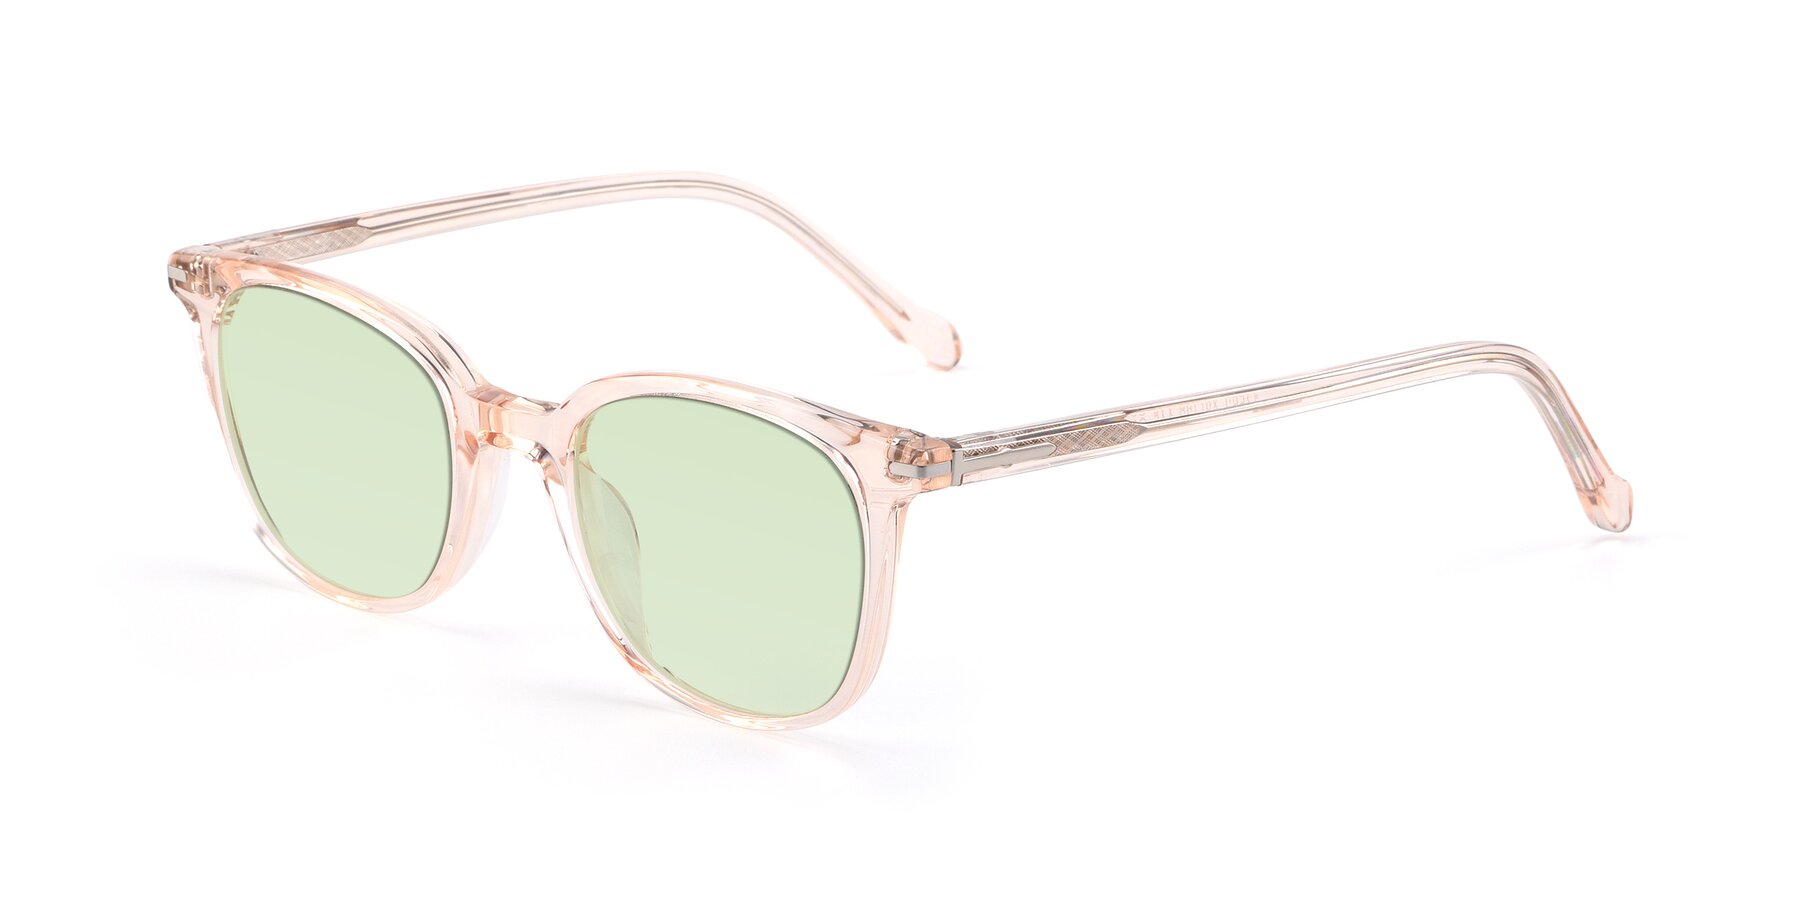 Angle of 17562 in Transparent Pink with Light Green Tinted Lenses